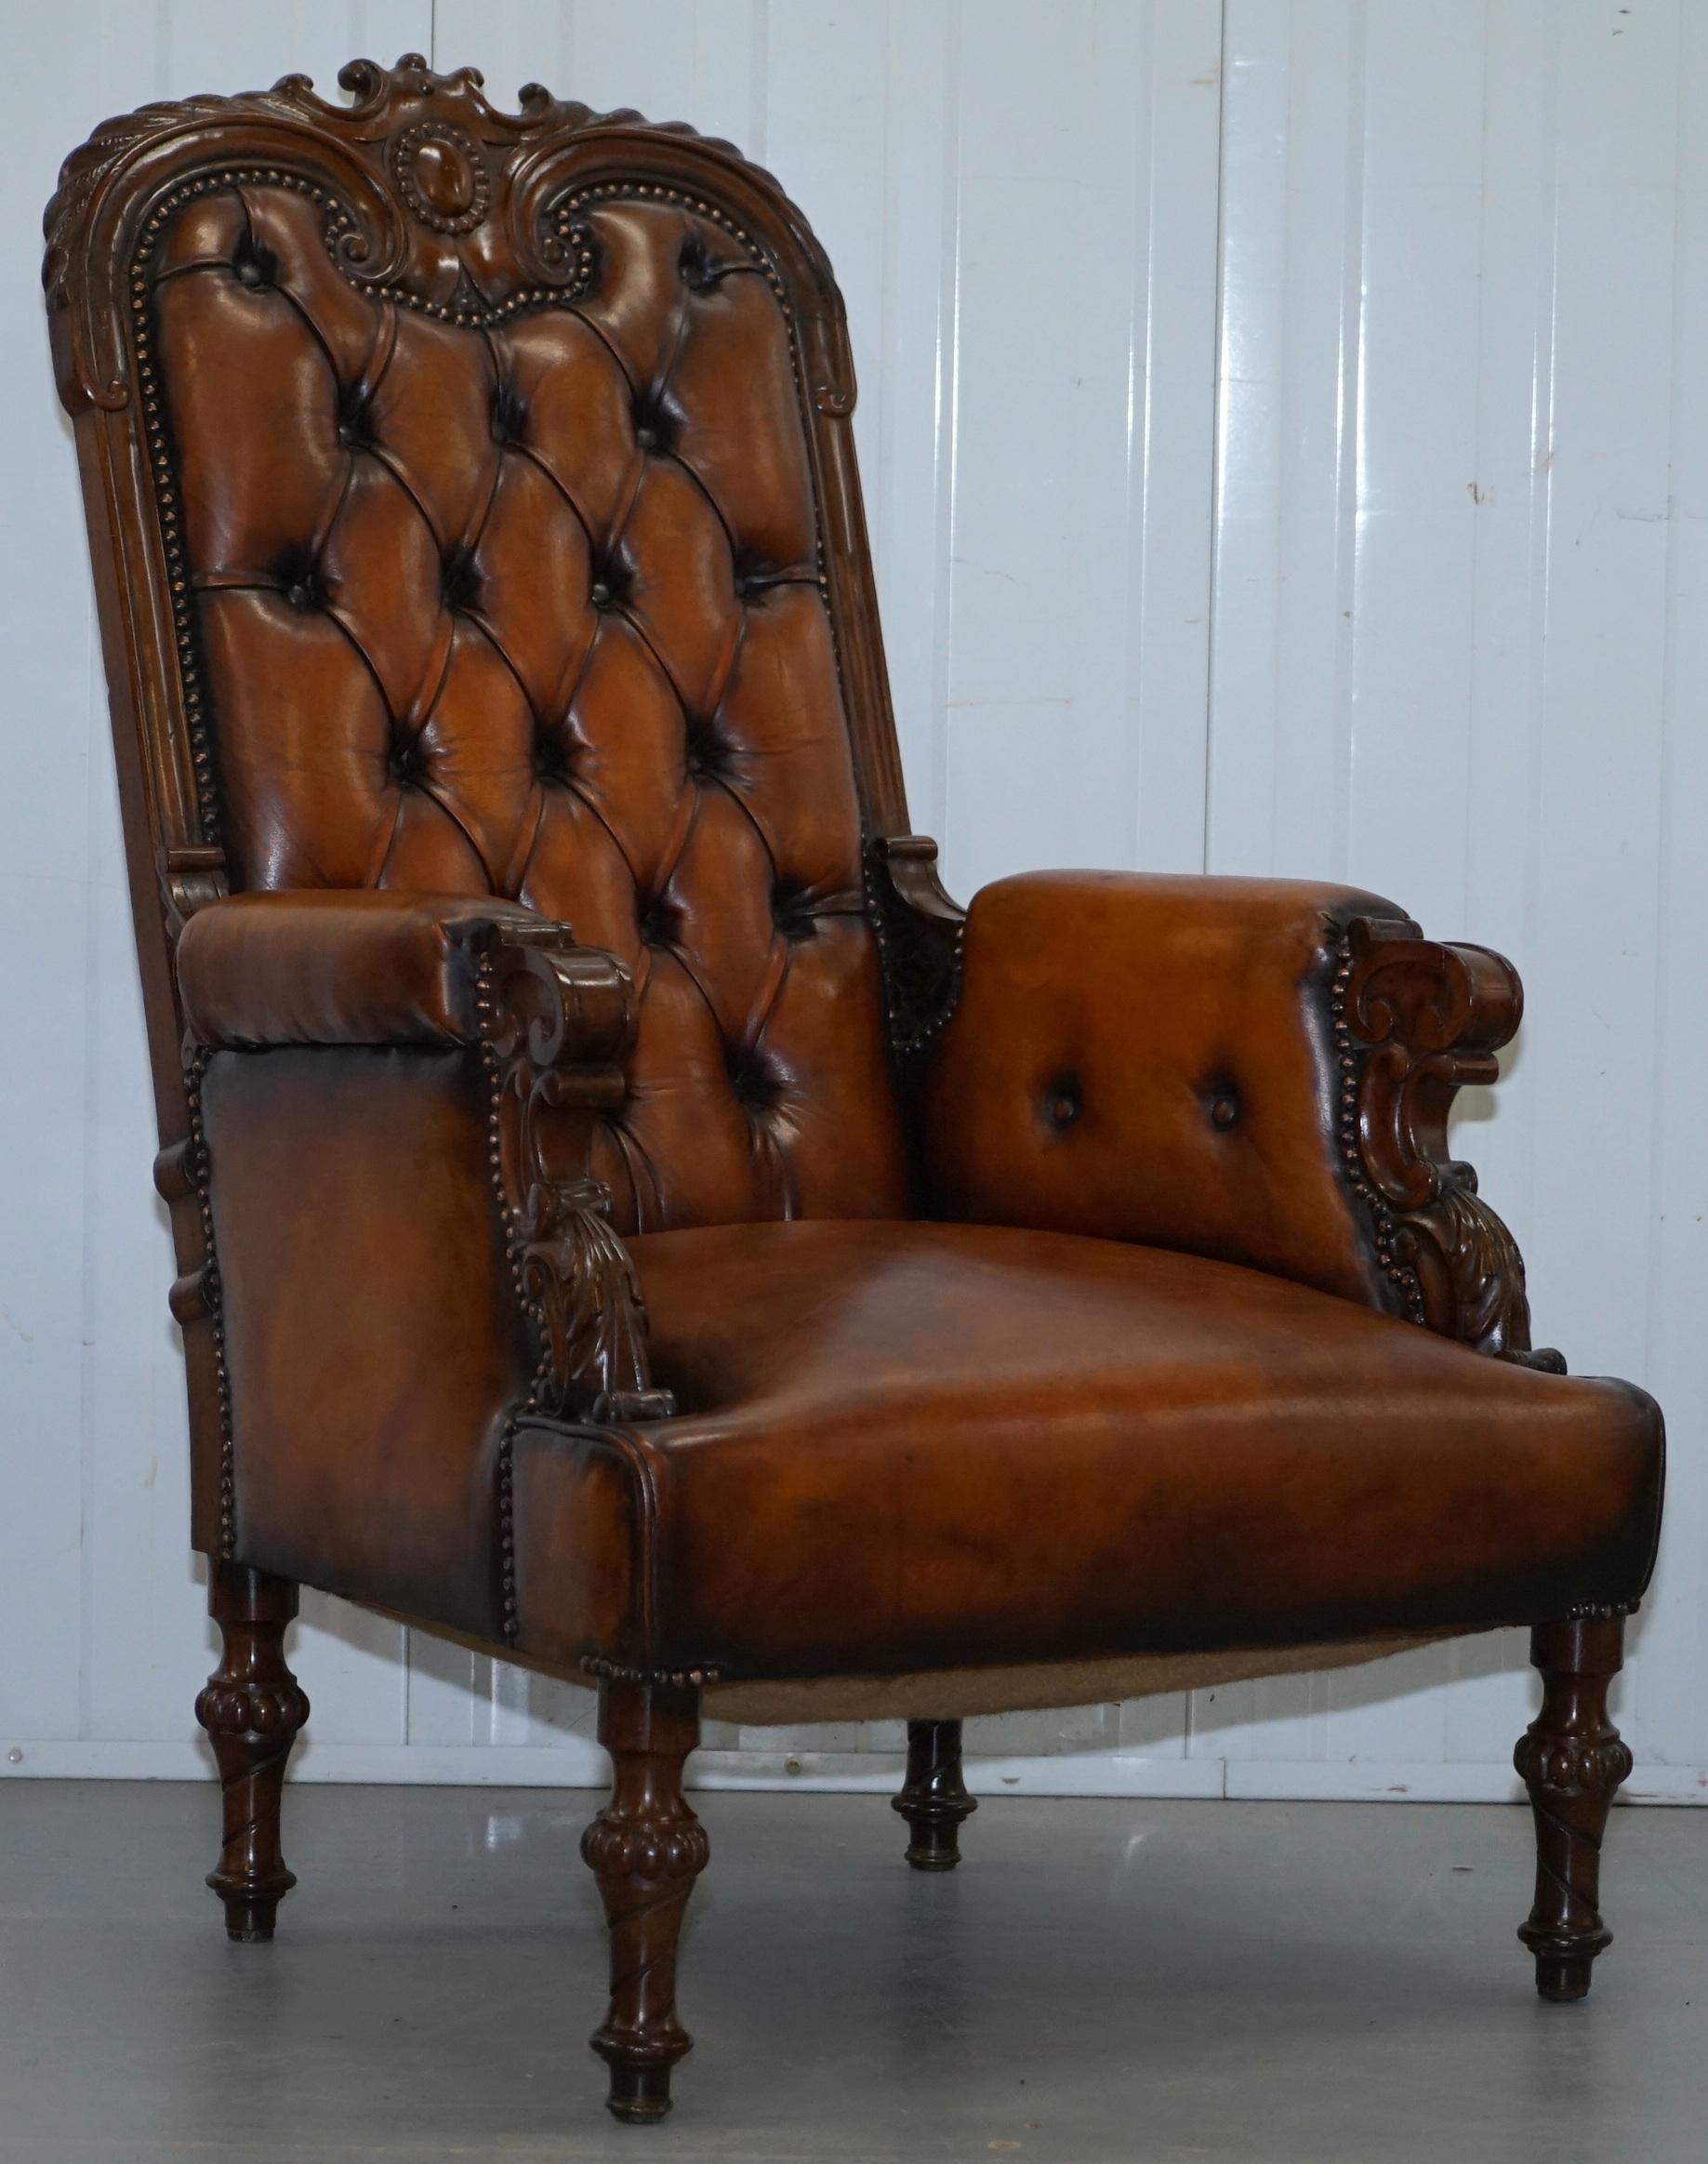 We are delighted to offer for sale this stunning pair of original fully restored Chesterfield show wood frame Victorian library reading slipper armchairs with hand dyed brown leather upholstery

A very rare and desirable pair of exceptionally